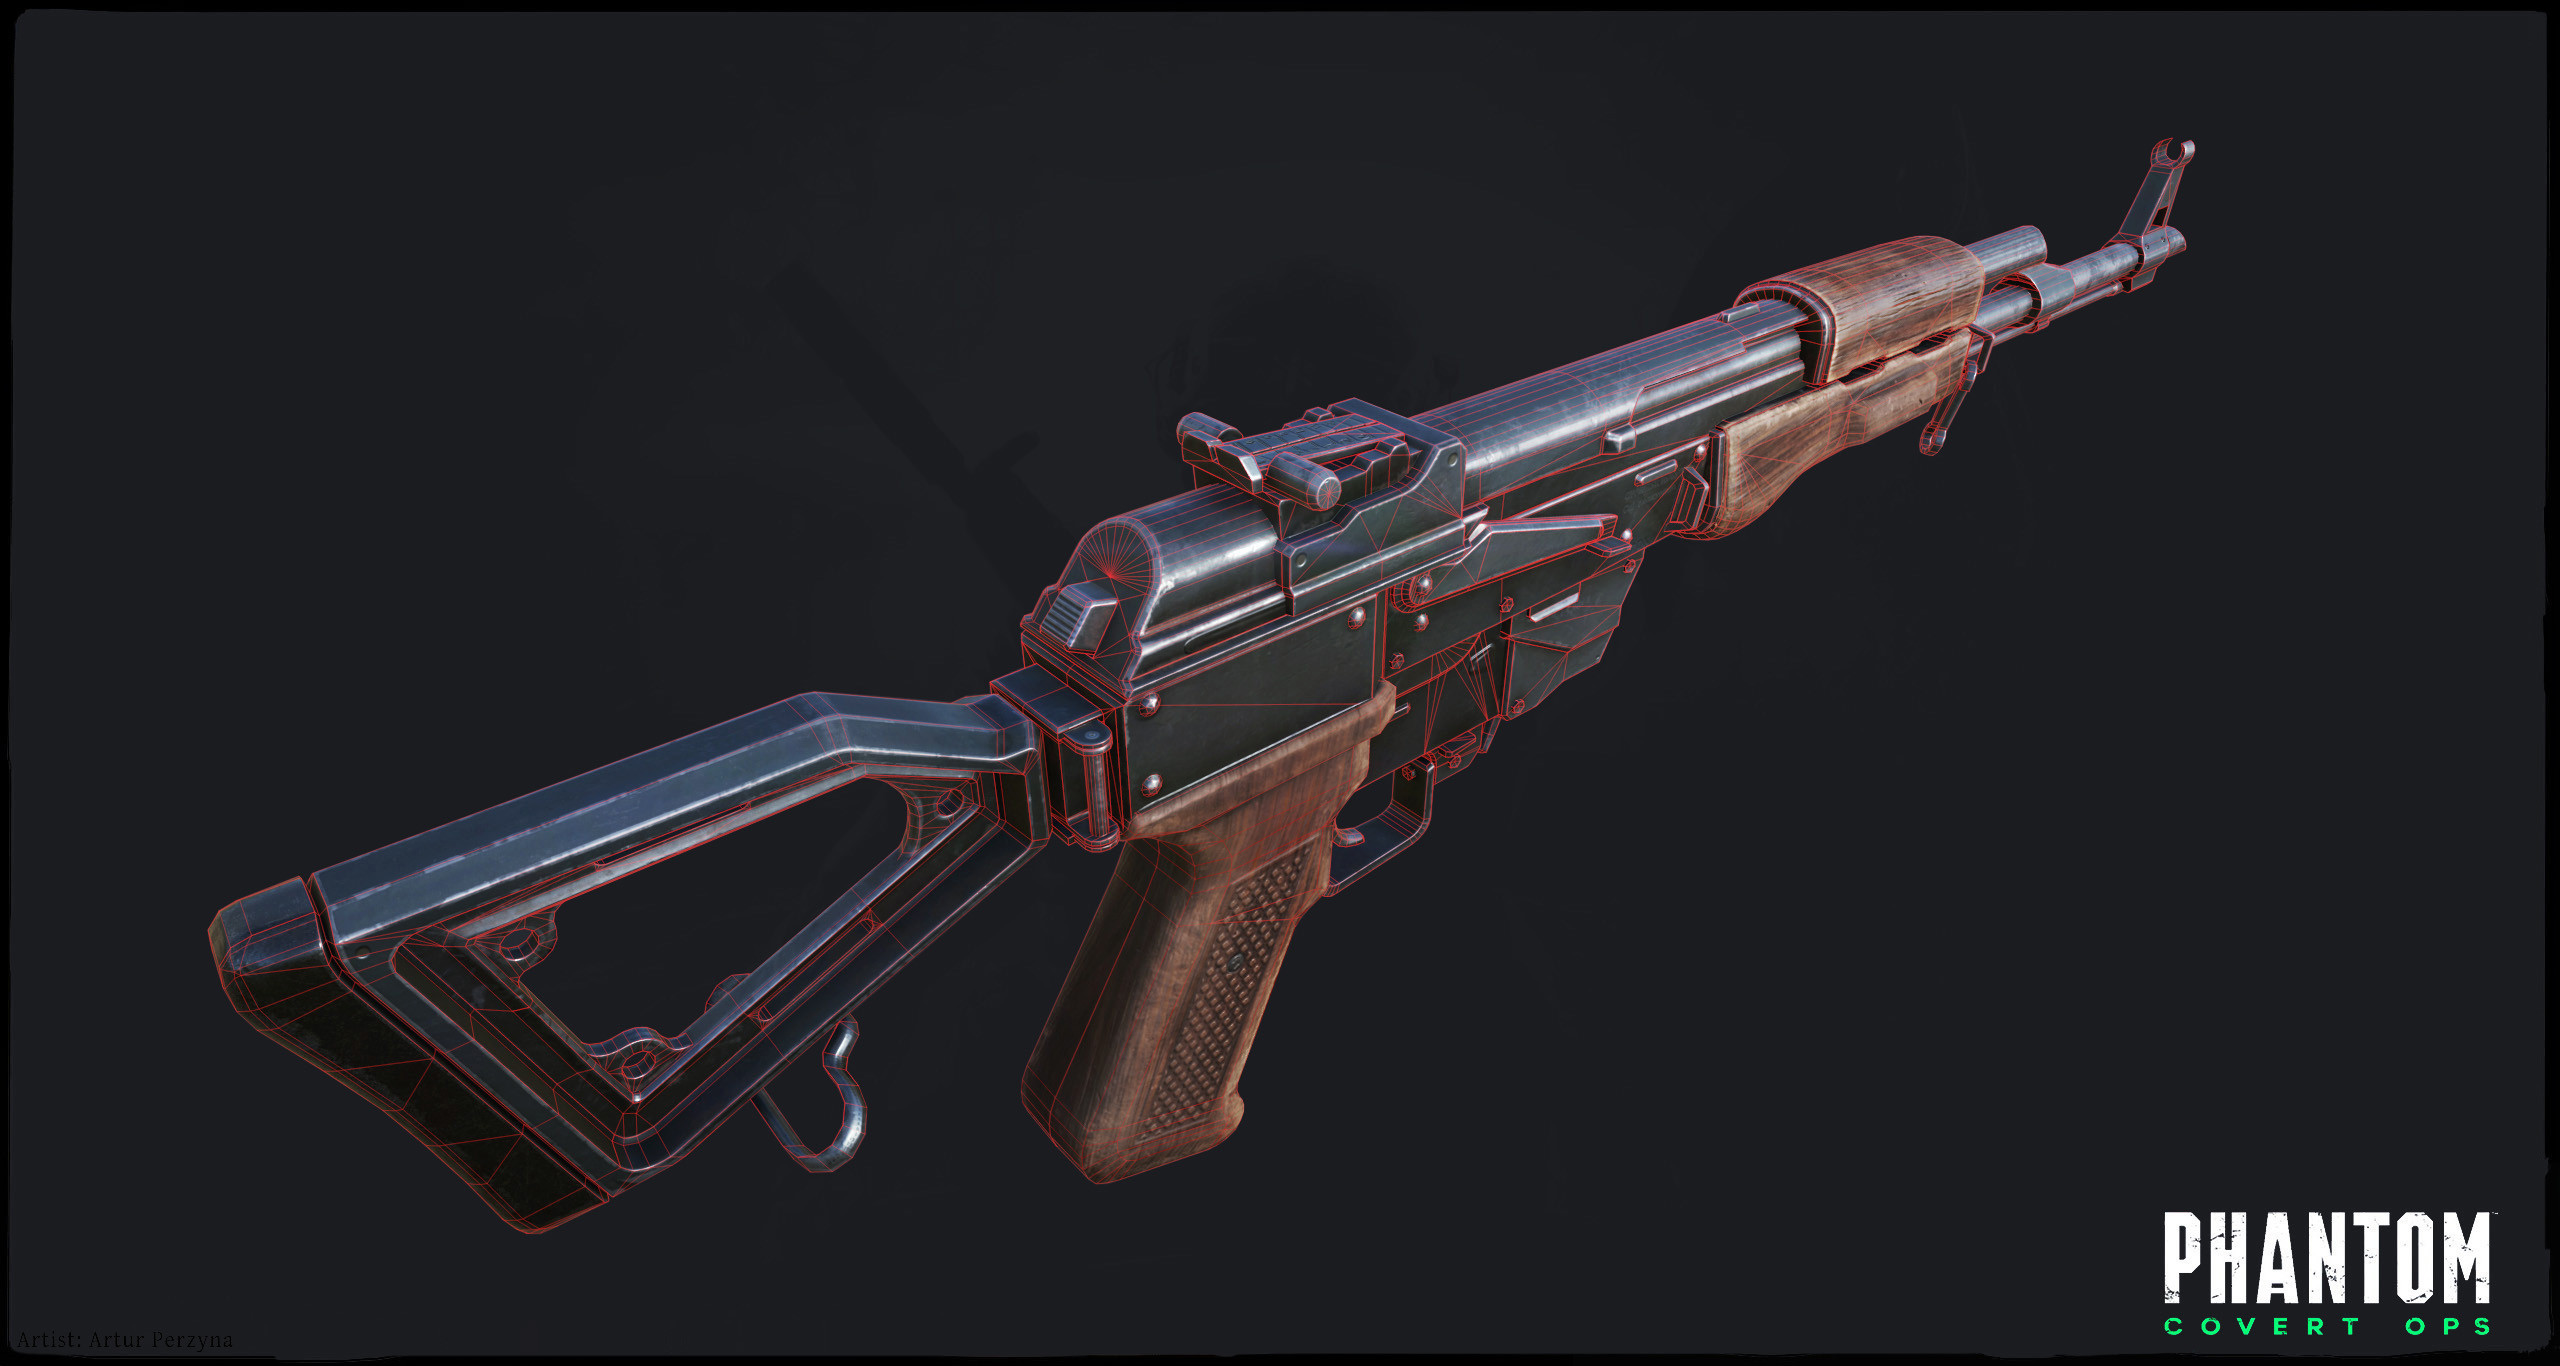 Substance Painter, AKSM with a custom stock and our own proportions due VR req.